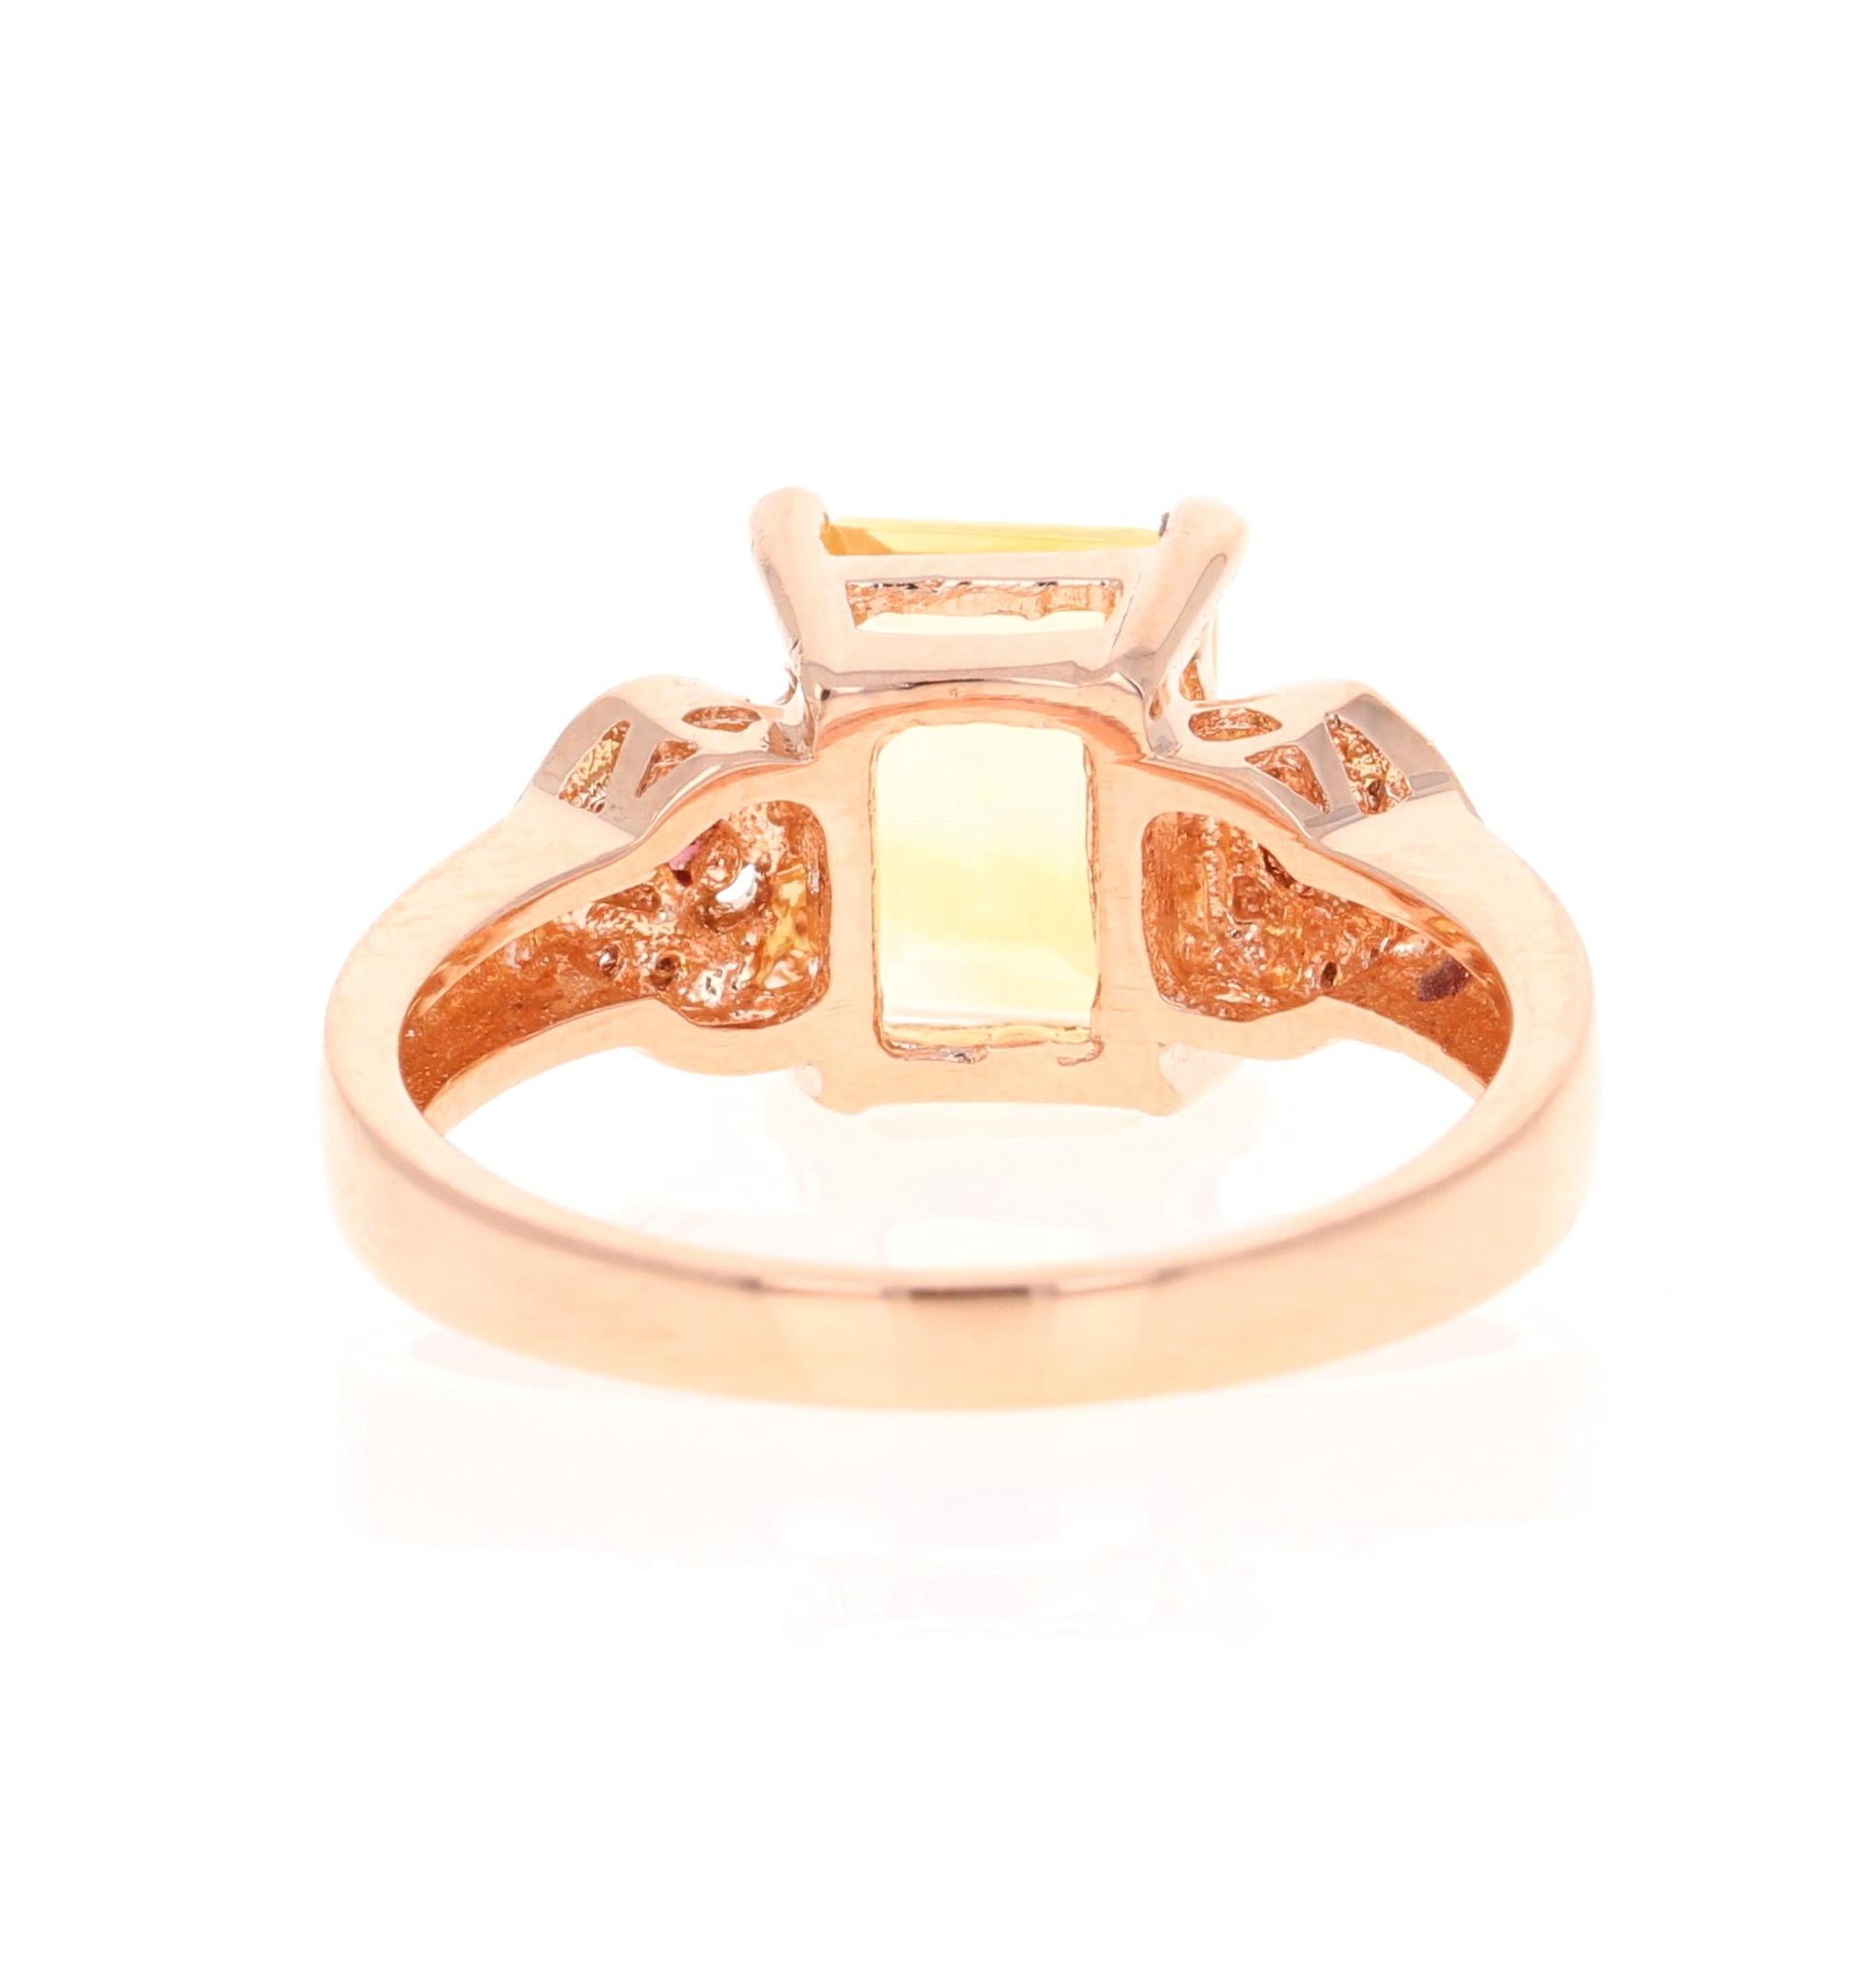 Contemporary 2.45 Carat Citrine Sapphire Diamond Rose Gold Engagement Ring For Sale